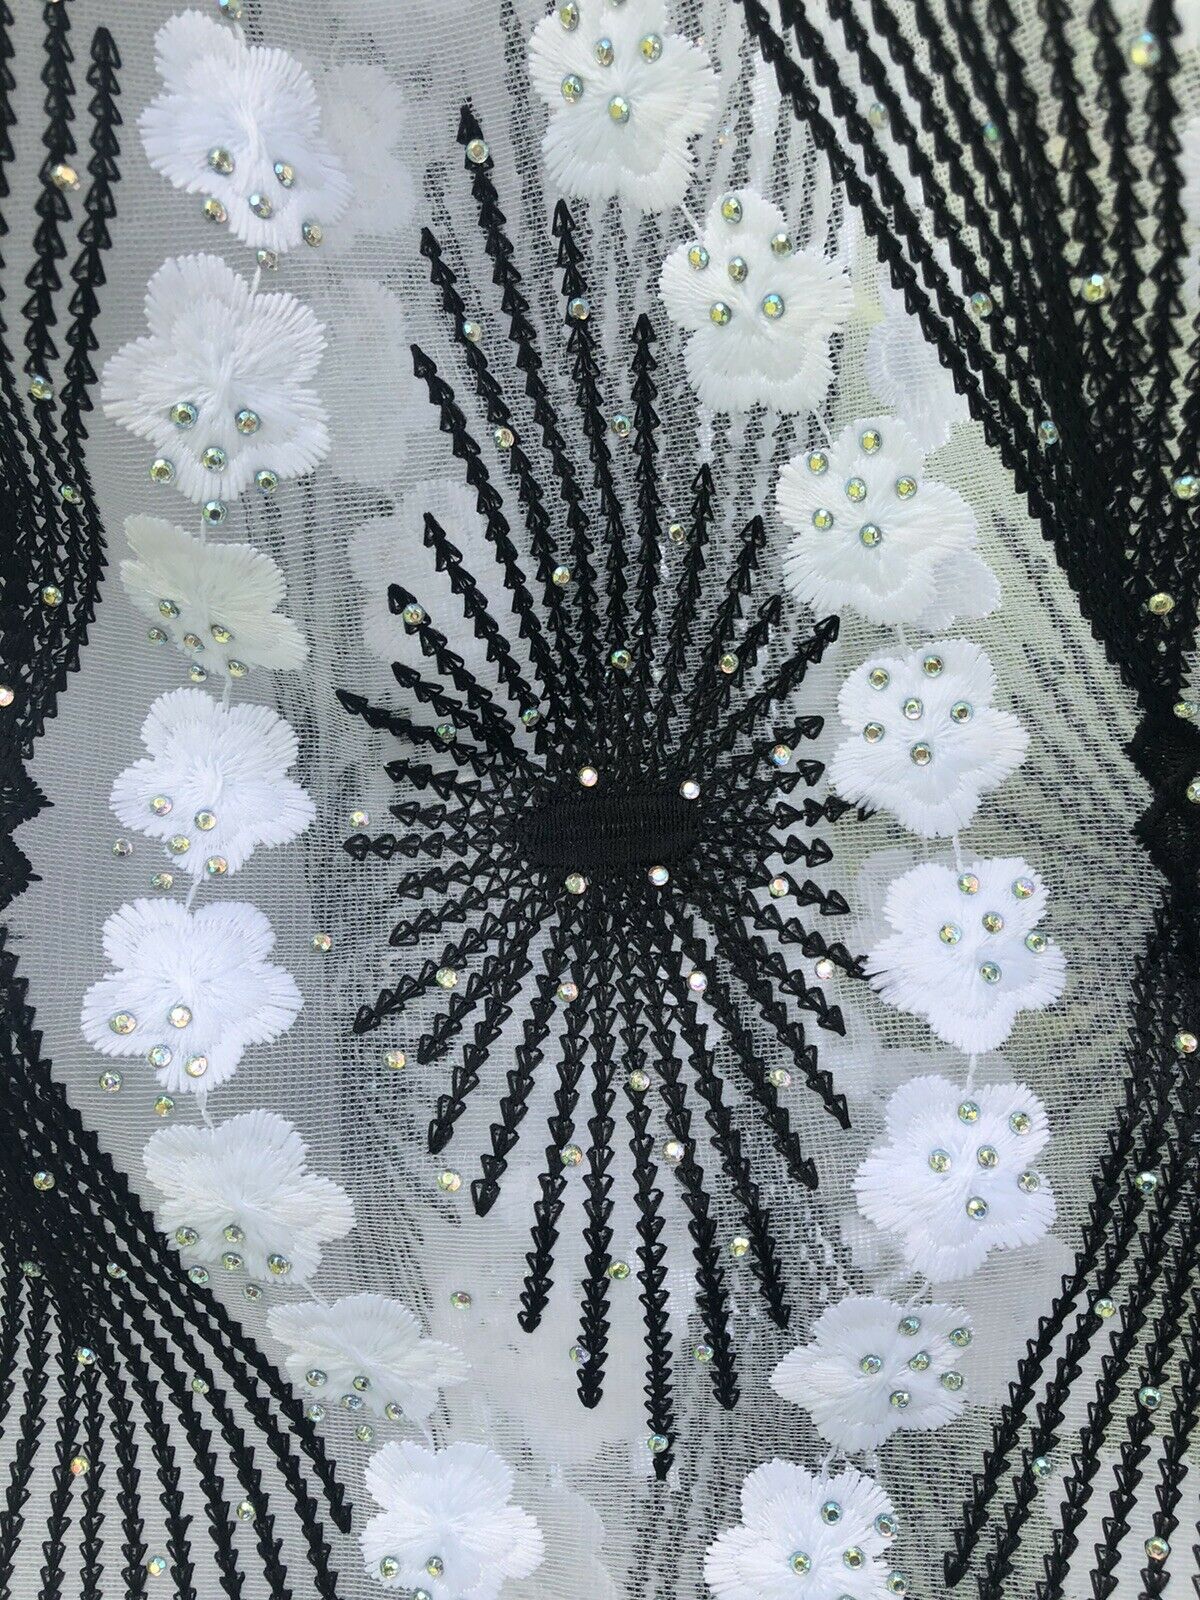 Black and White Embroidered Lace Fabric with Rhinestones